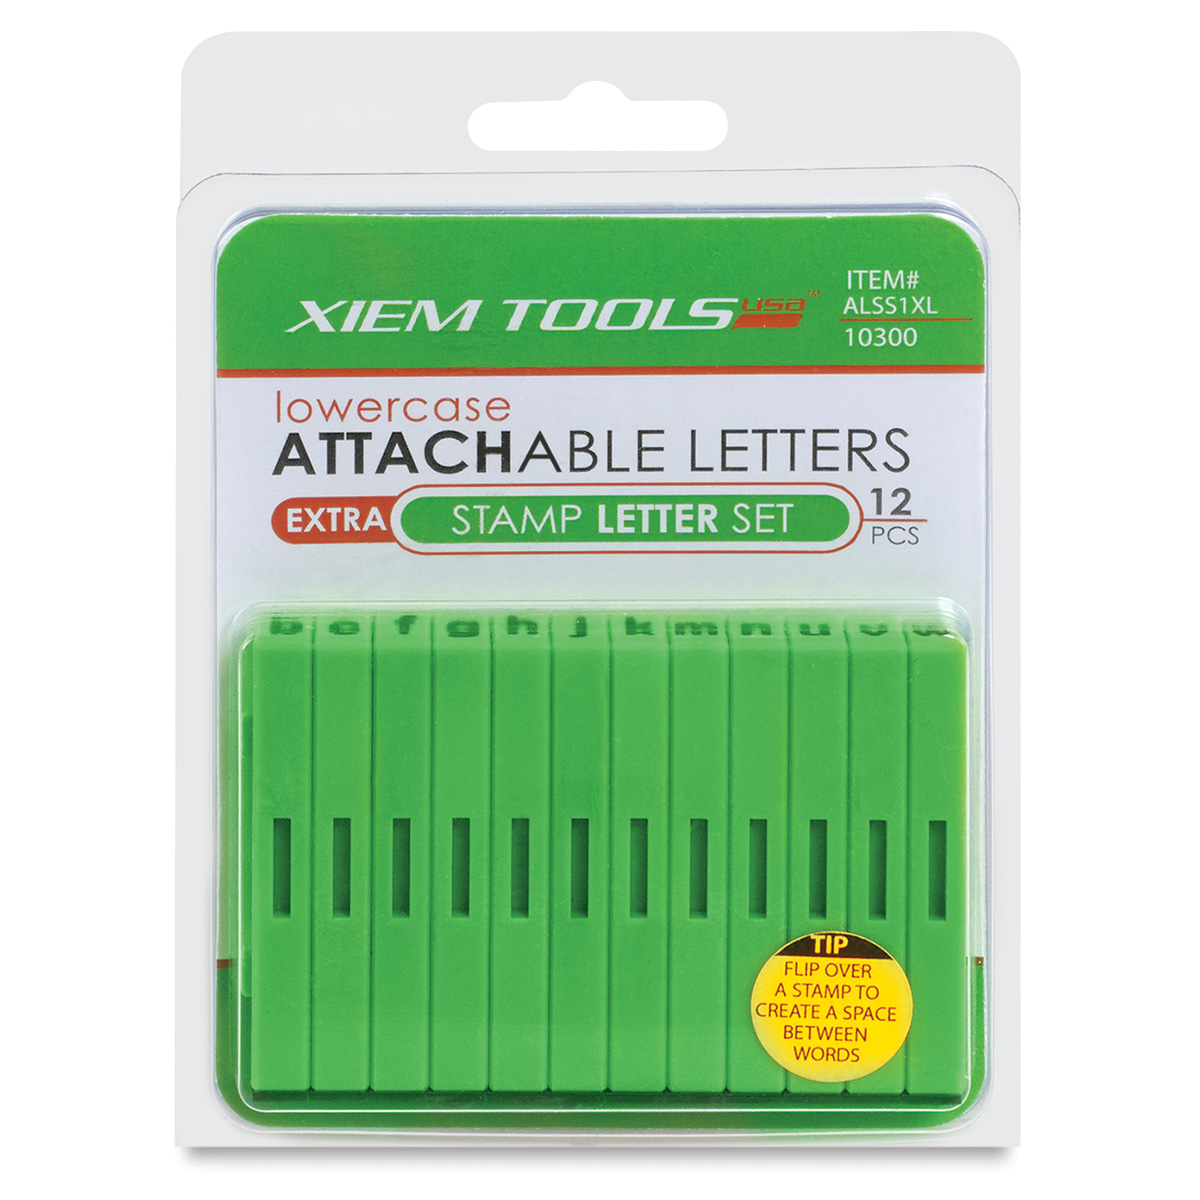 Extra Attachable Letter Stamp Set 12 pcs Lowercase - Ceramic, Clay, Pottery  Tools - Xiem Tools USA